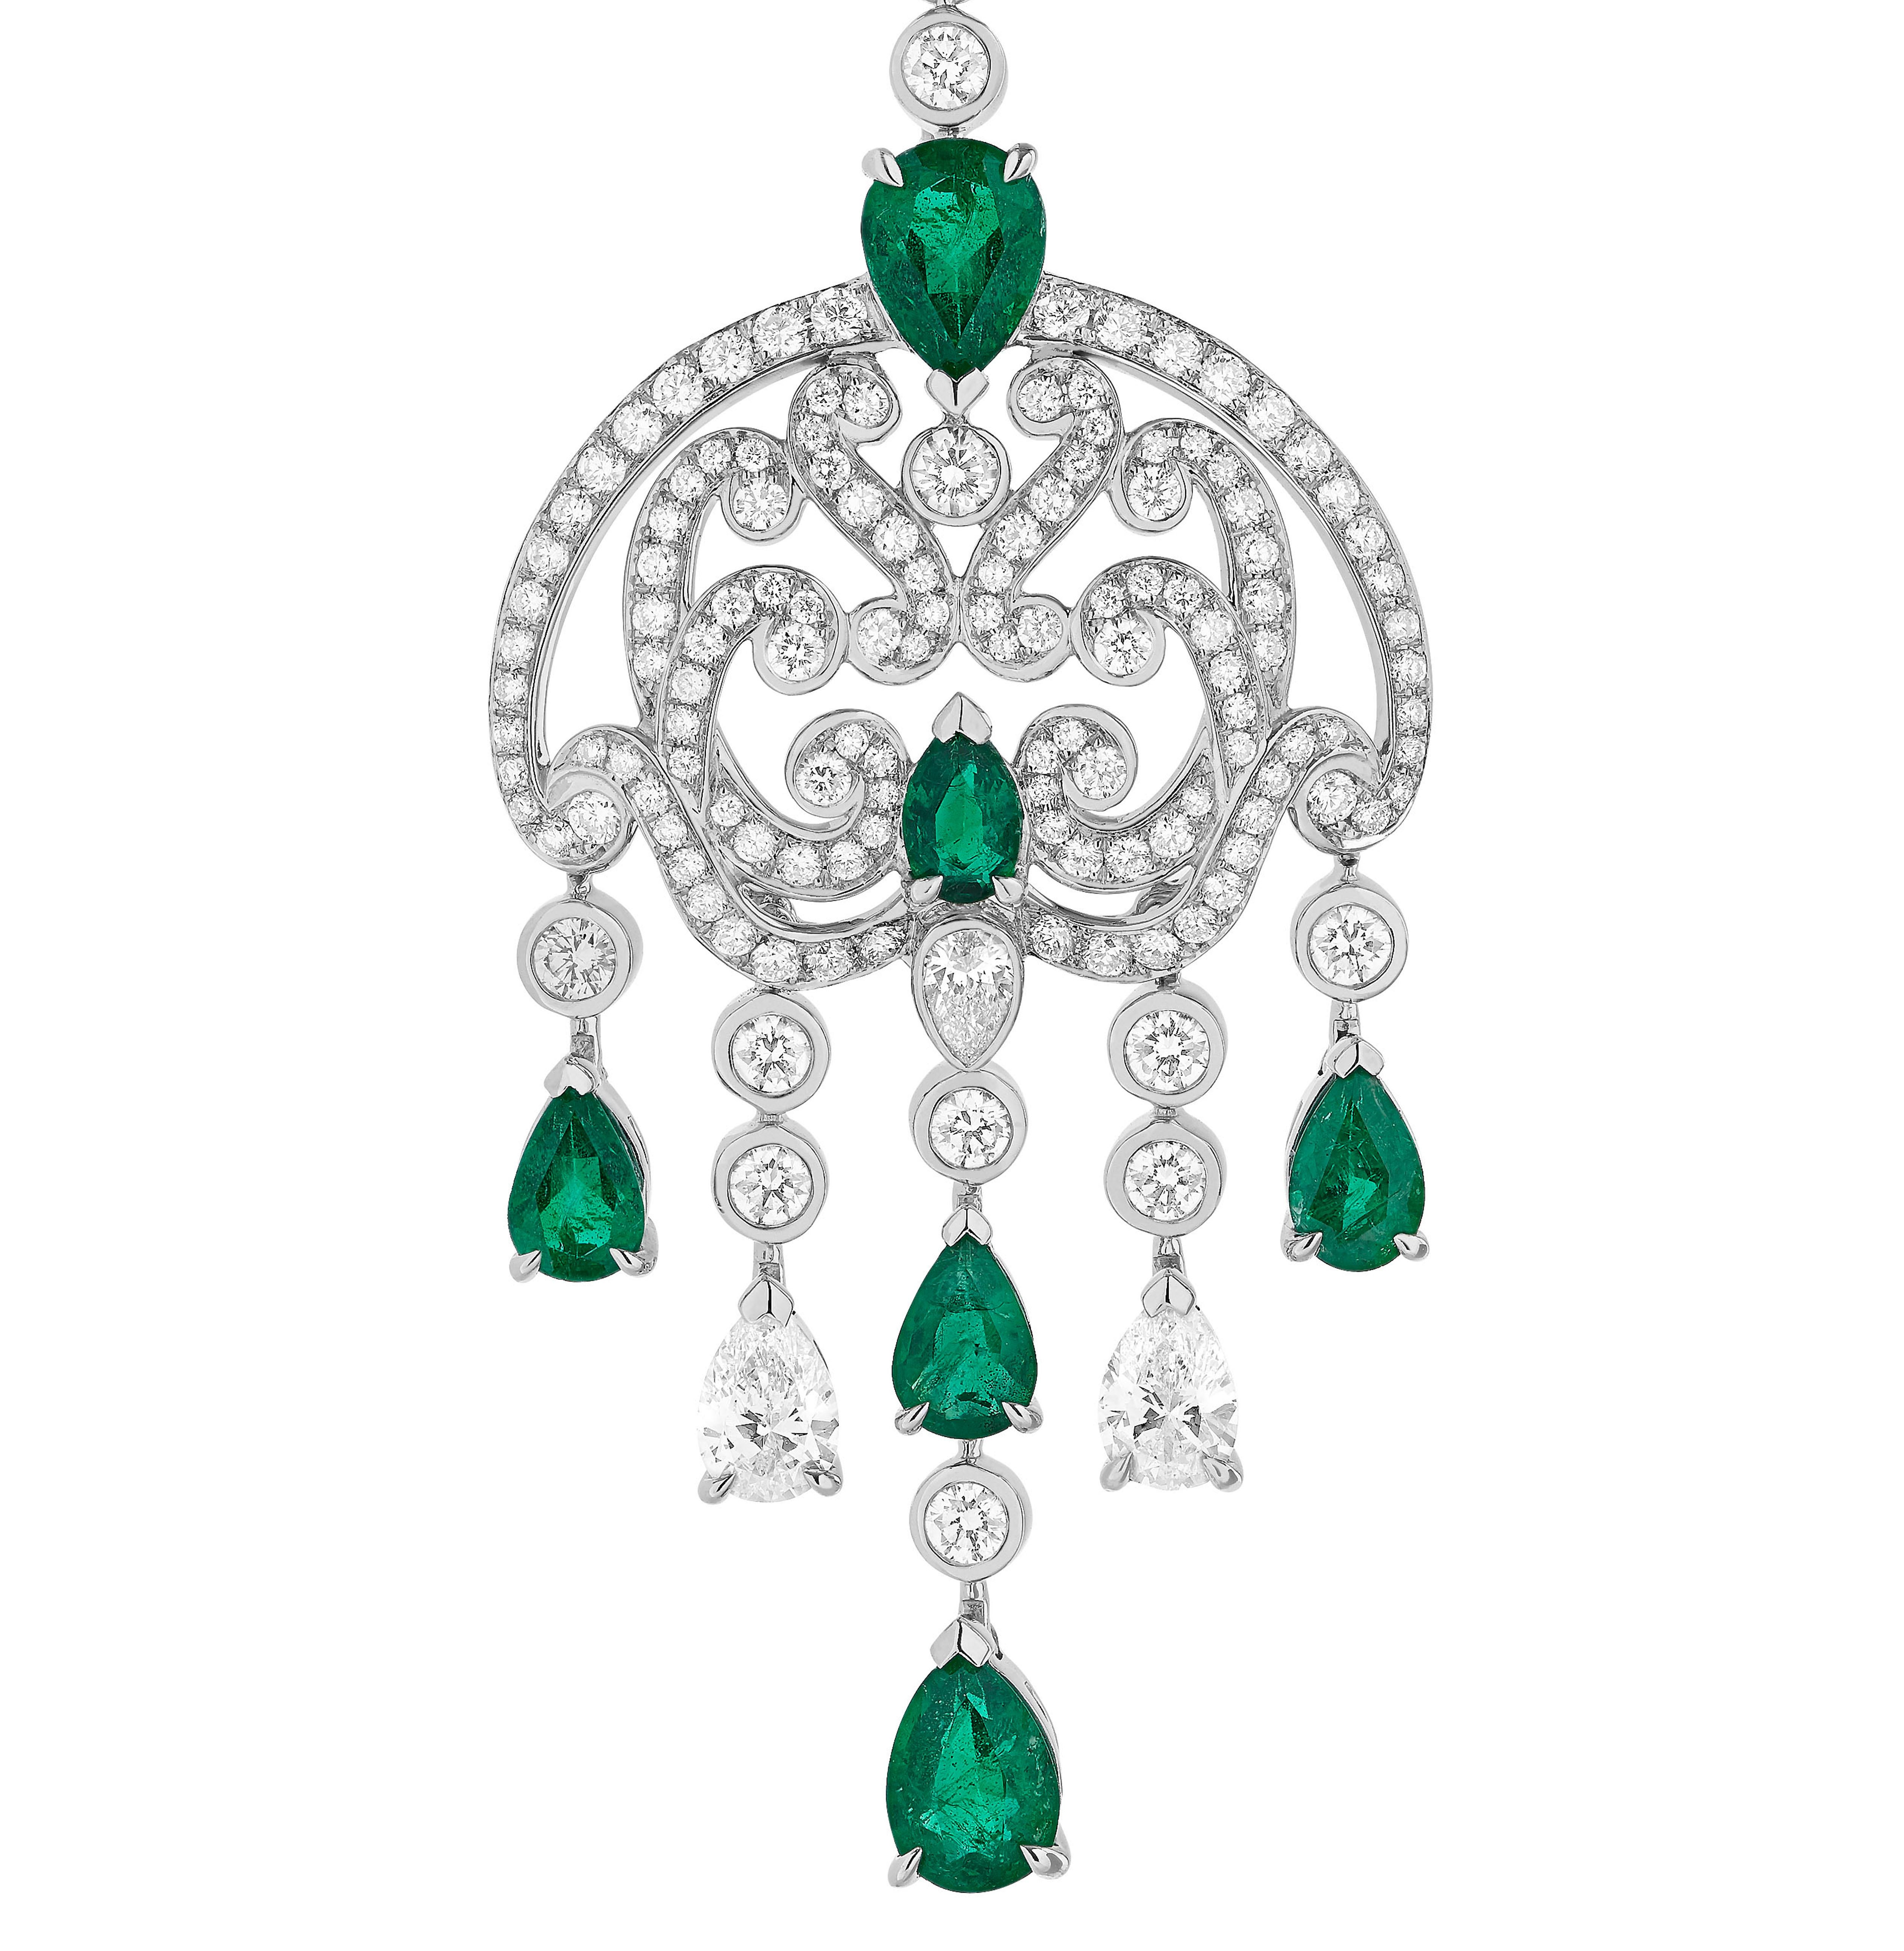 A pair of 18 karat white gold chandelier earrings from the House of Garrard. The earrings are set with 12 pear shaped emeralds weighing 5.16 carats, 6 pear shaped diamonds weighing 1.60 carats and round brilliant cut diamonds weighing 3.05 carats